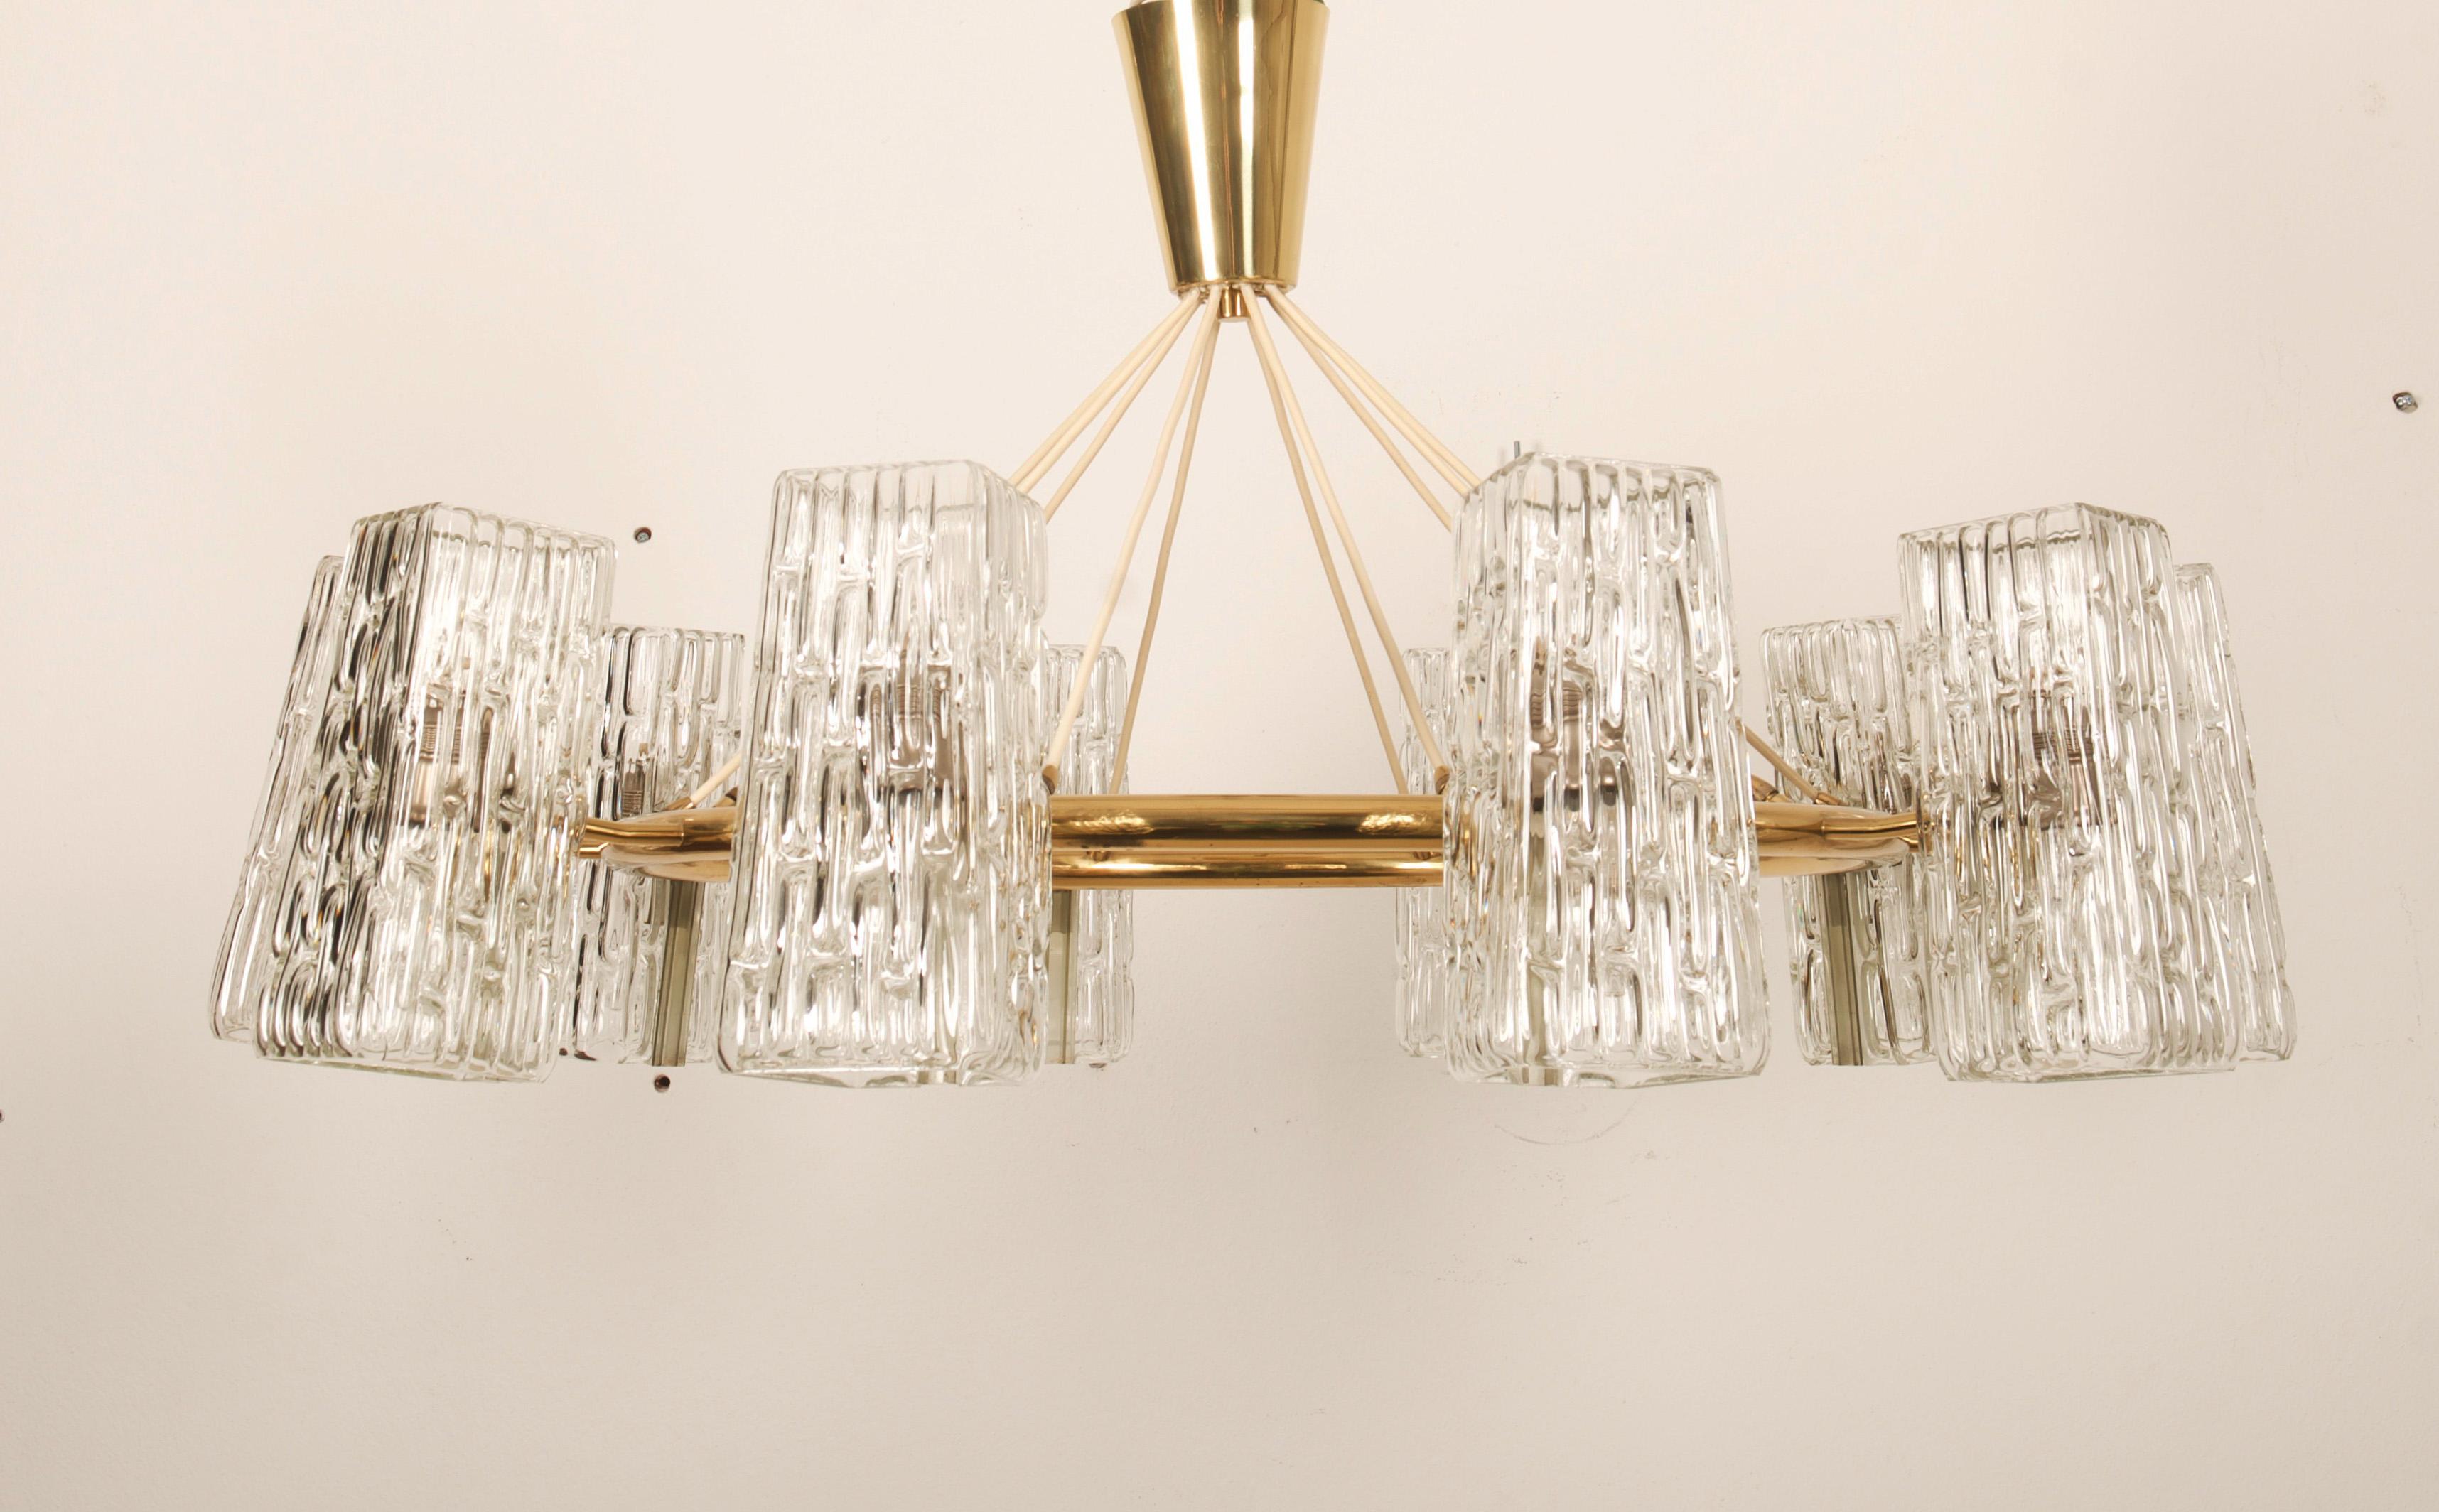 Huge Midcentury Brass Chandelier With Pressed Glass Shades By Rupert Nikoll For Sale 6